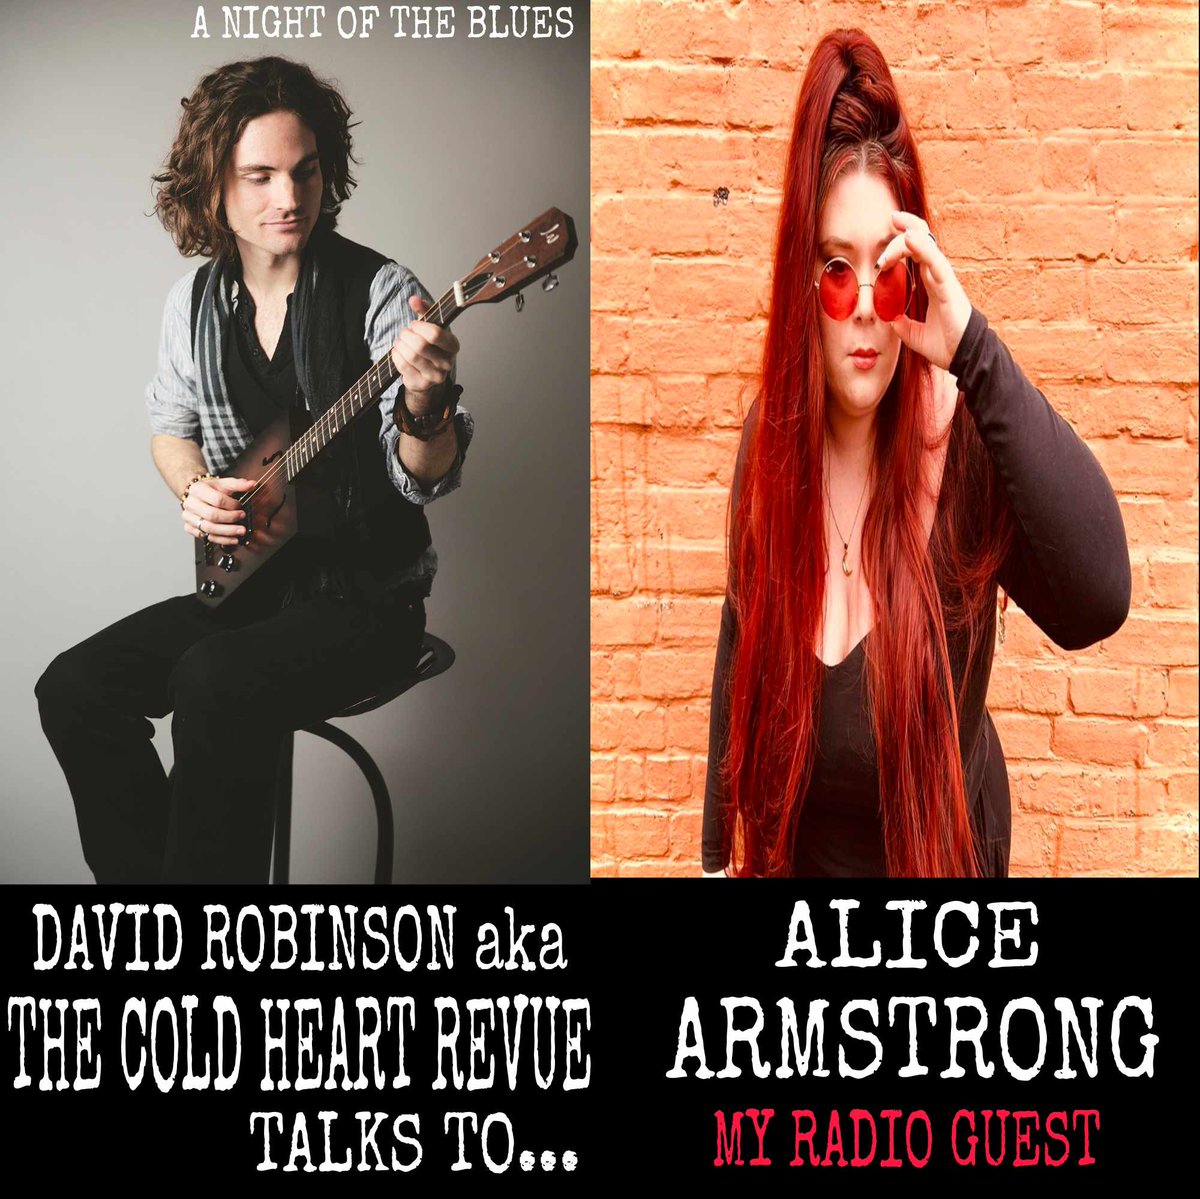 RADIO: my interview guest is @ThatSingerAlice A multi-award nominated vocalist, performer, songwriter and artist. David Robinson aka @coldheartrevue A Night of the Blues. #music #blues #radio #singer #interview